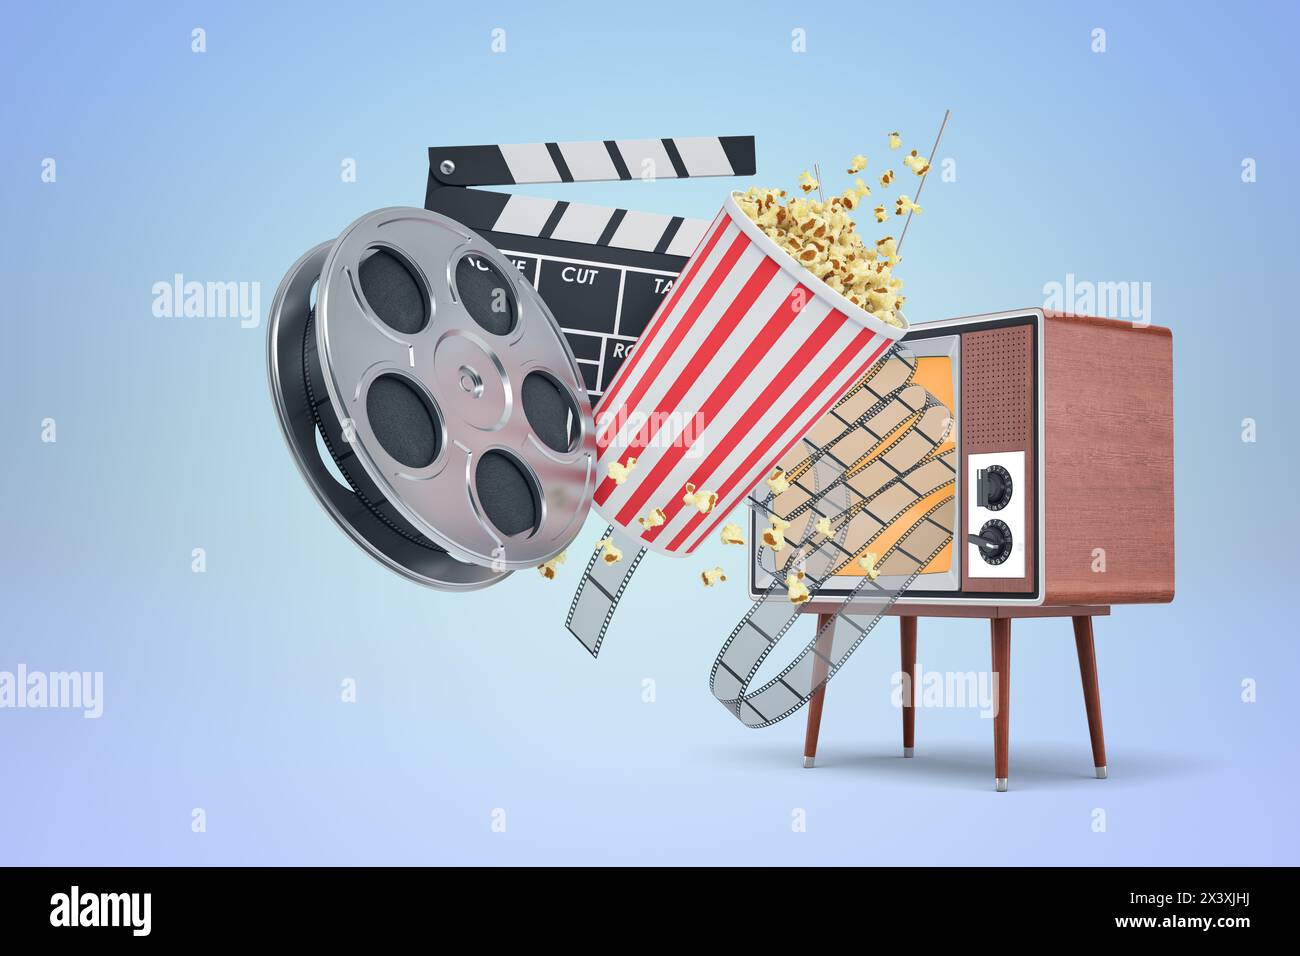 Retro Television with Movie Clapper and Film Reel Stock Photo